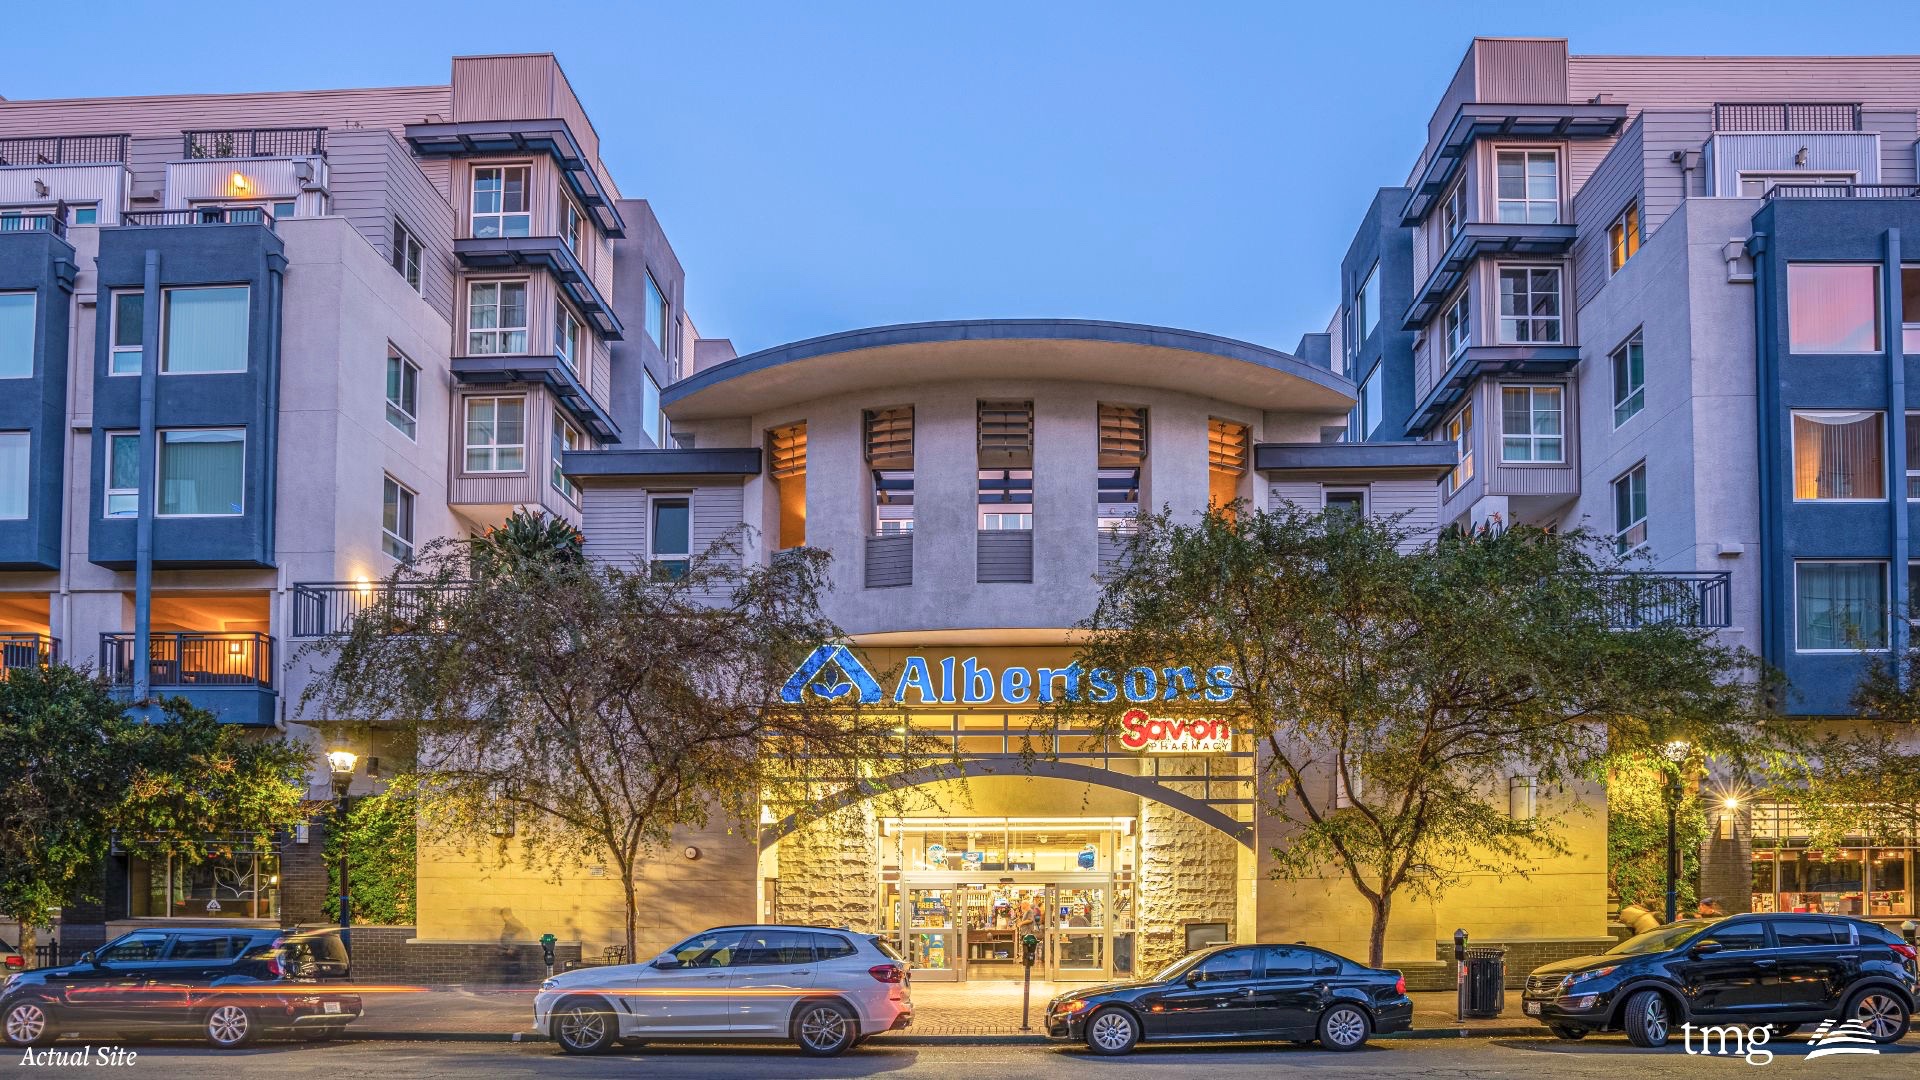 The Albertsons store is at 655 14th St. in Downtown.